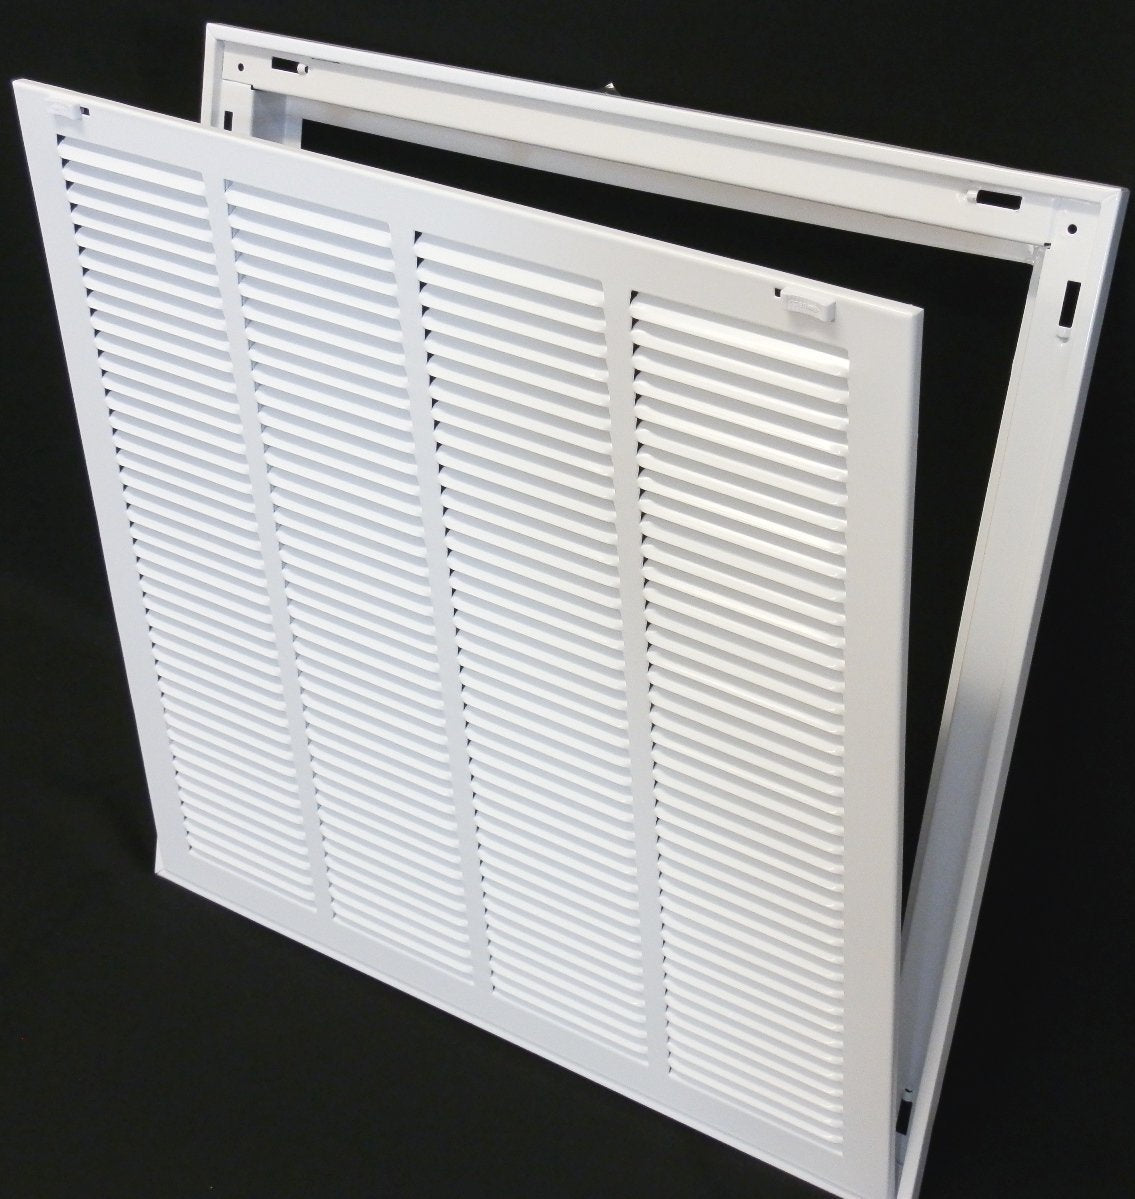 25&quot; X 28&quot; Steel Return Air Filter Grille for 1&quot; Filter - Removable Frame - [Outer Dimensions: 27 5/8&quot; X 30 5/8&quot;]